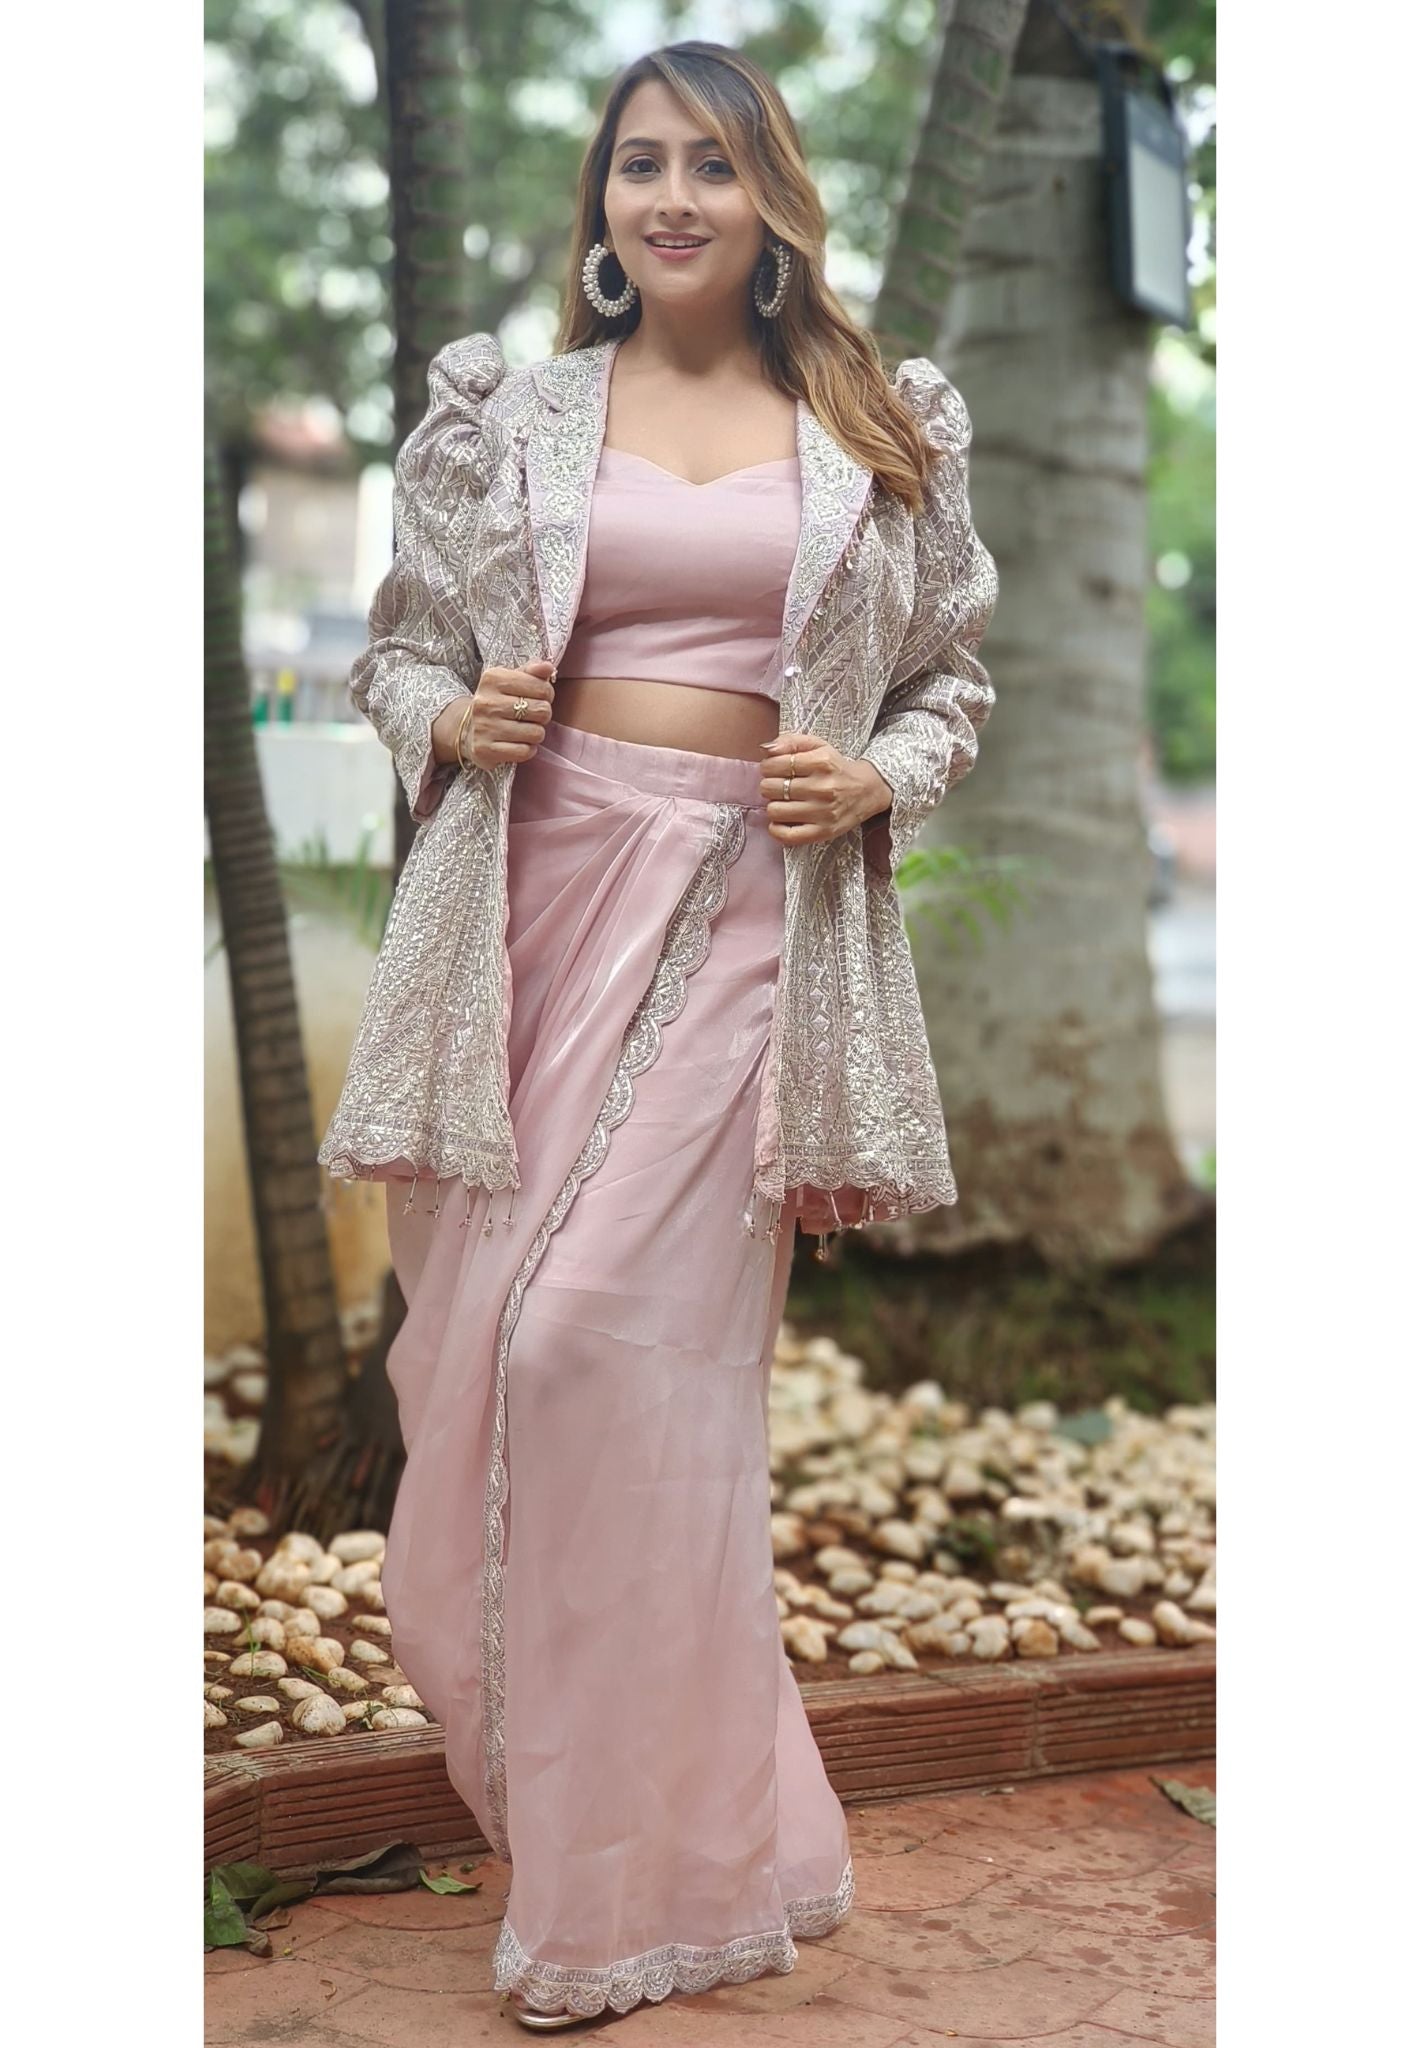 Party Wear Embroidered Jacket Indo-western Outfit With Crop Top And Tissue Dhoti Skirt DRY WASH 0